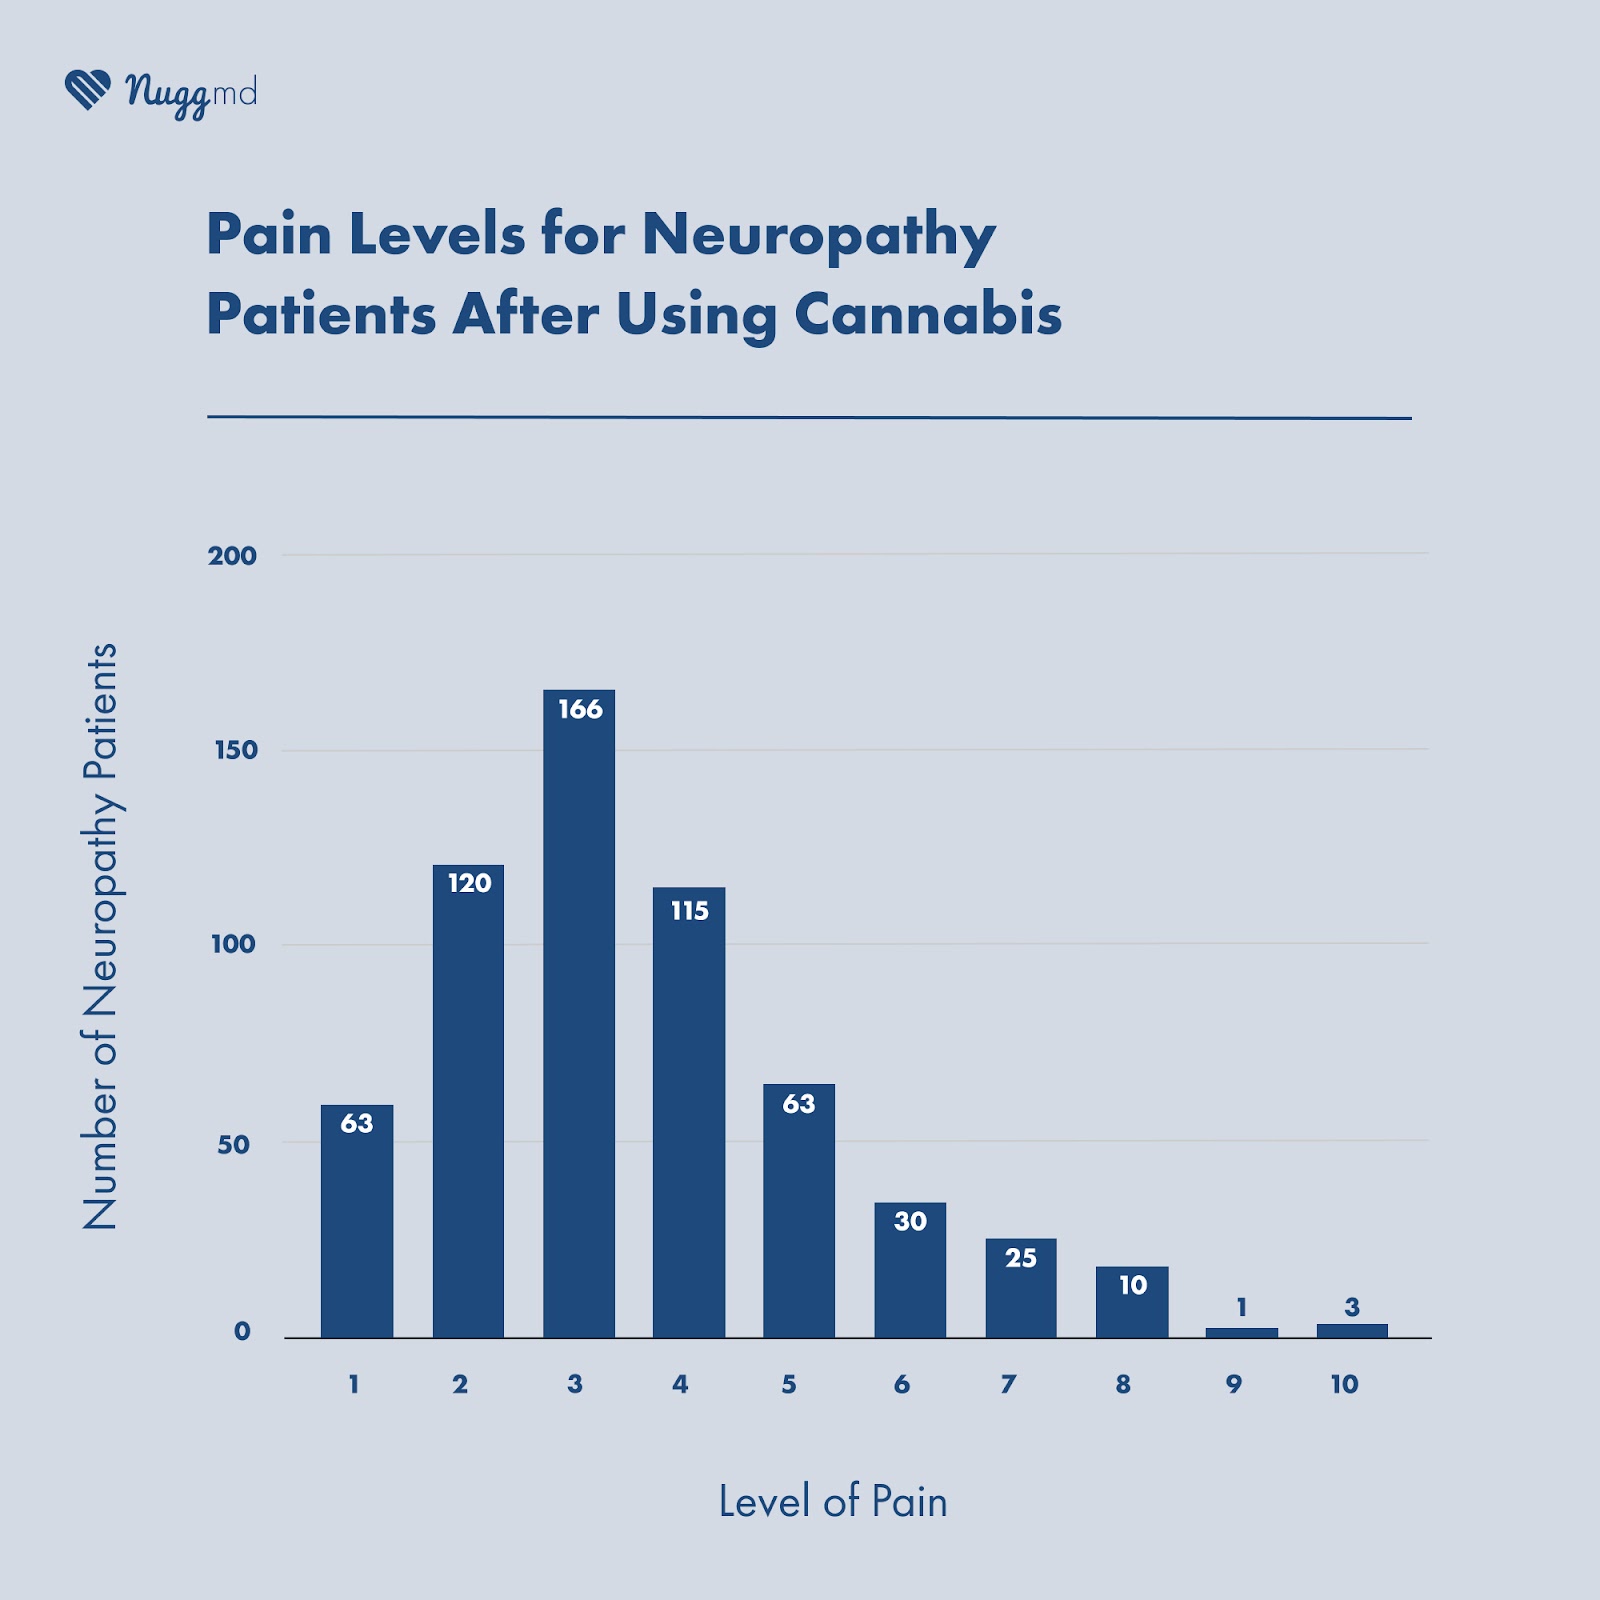 pain levels for neuropathy patients after using cannabis